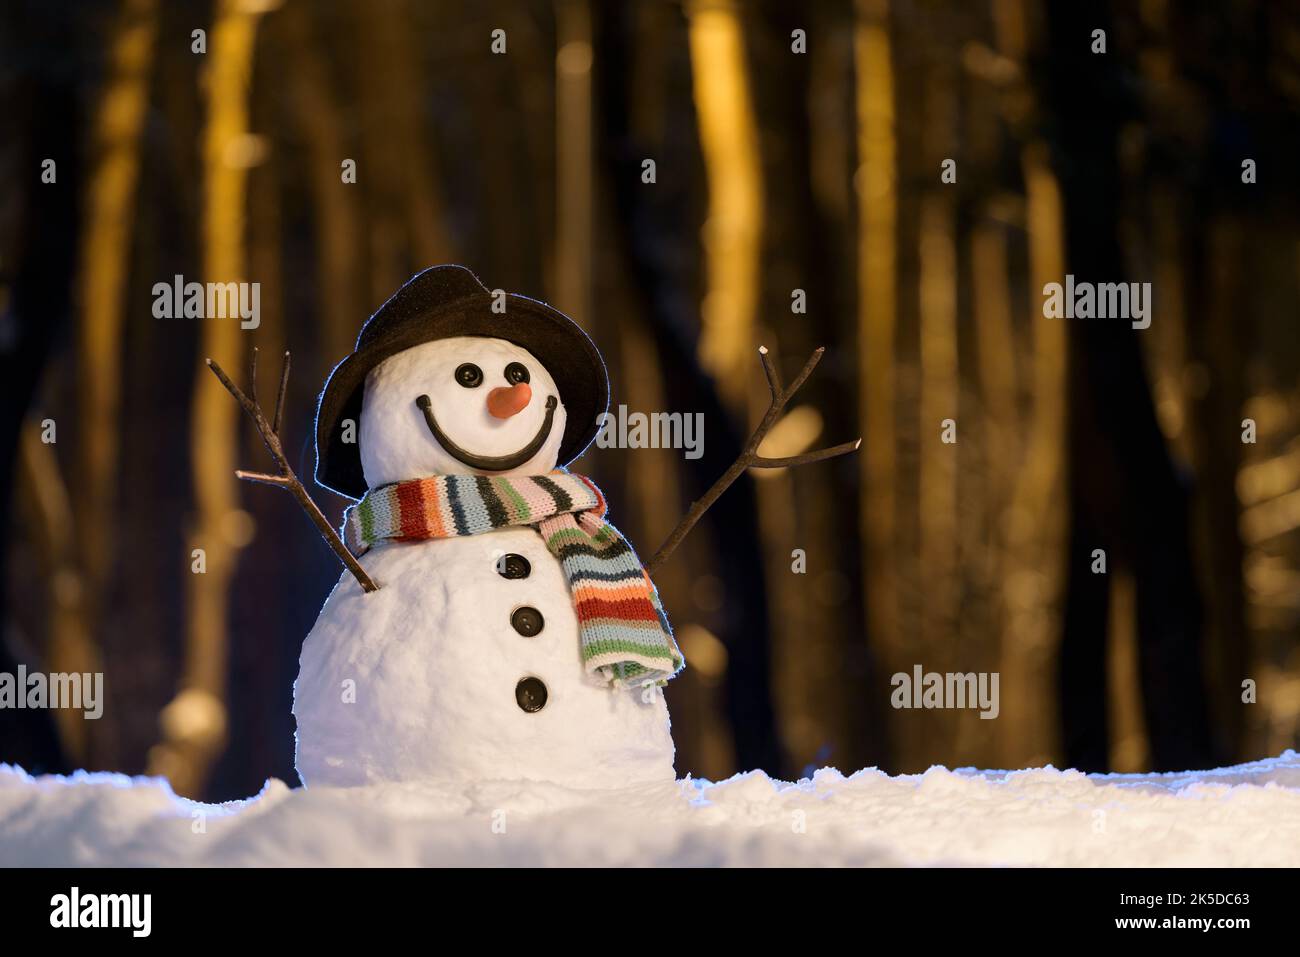 Cheerful snowman in the snowy park in the evening Stock Photo